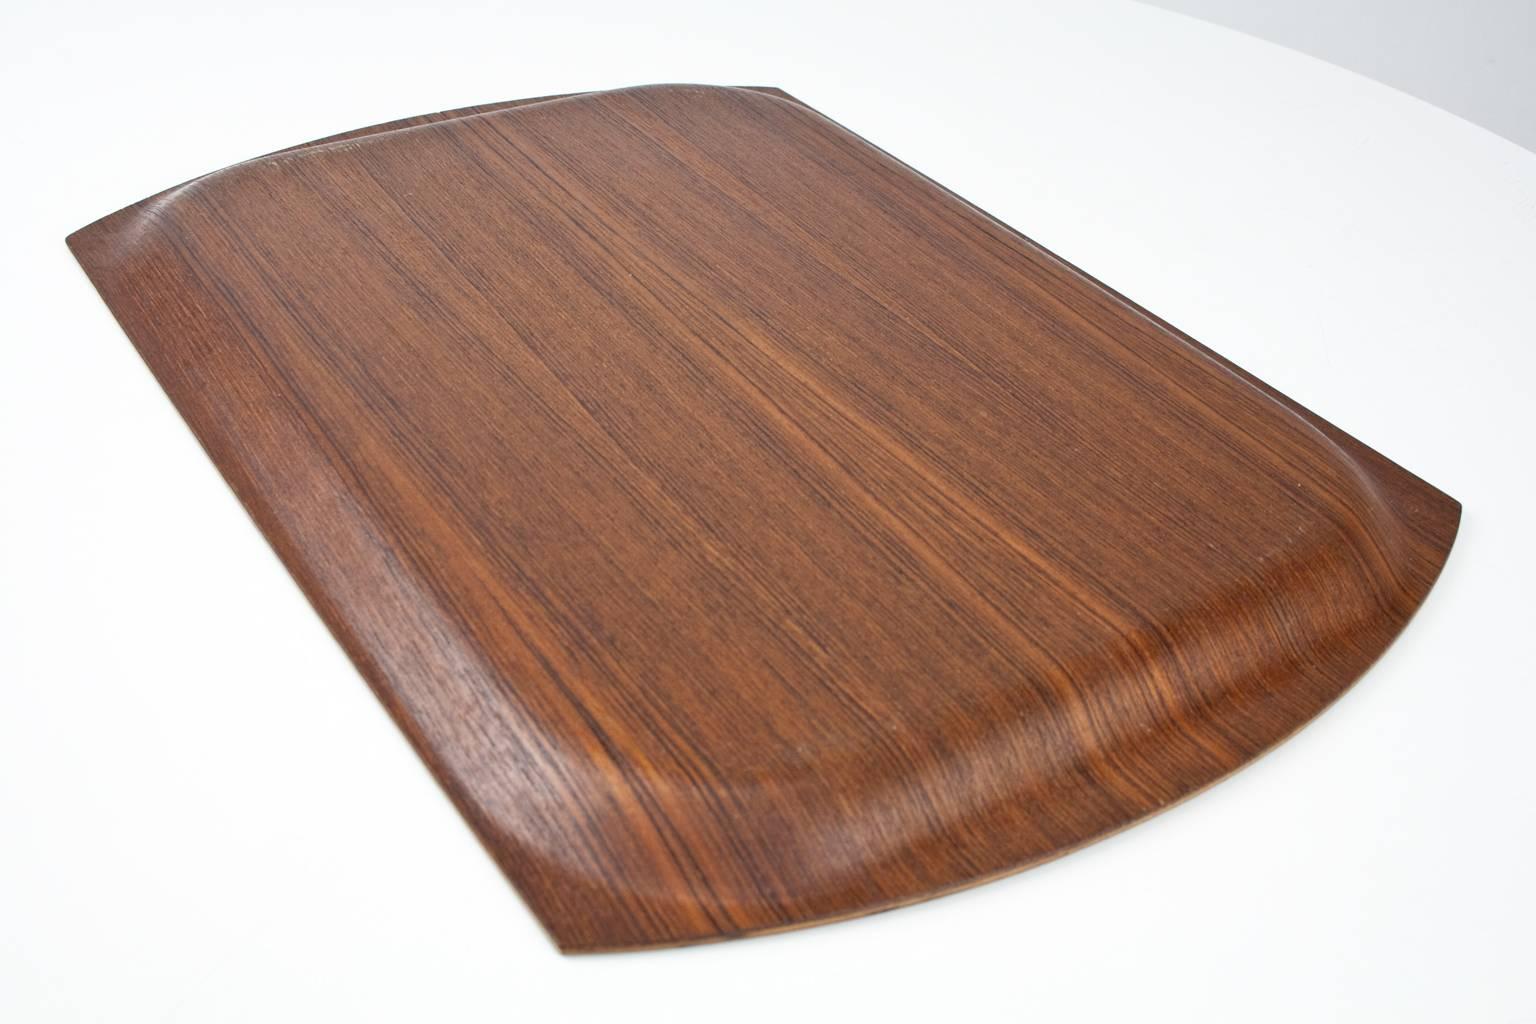 Scandinavian Modern serving tray in molded teak. Beautiful home accessory. The tray has a rectangle design with slightly curved edges and a raised lip. Unsigned. 

Condition: Excellent vintage condition; professionally cleaned and oiled.